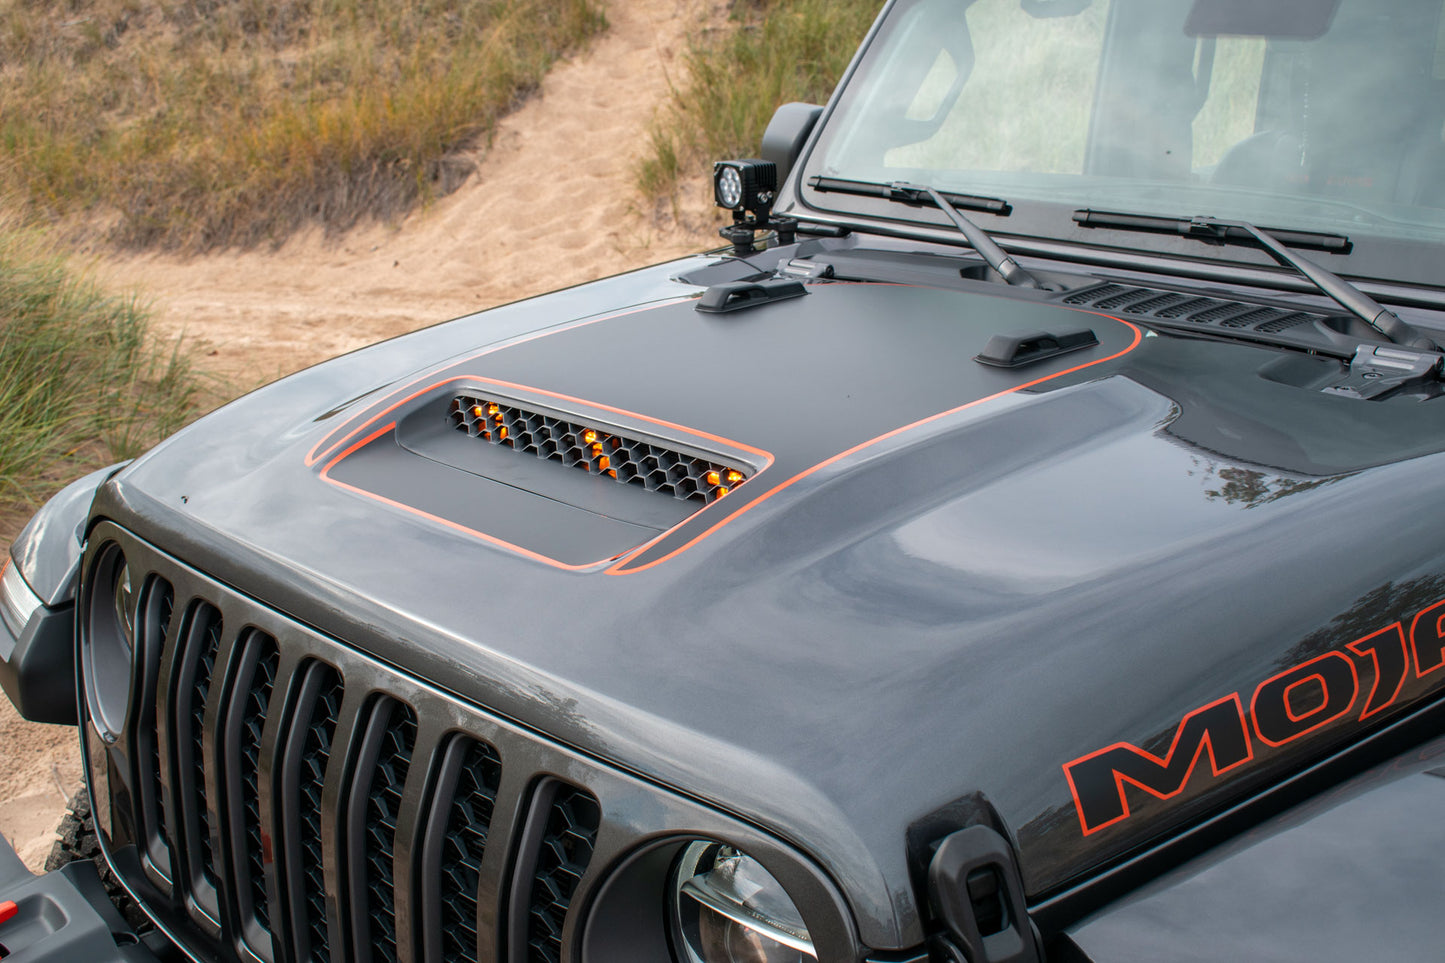 Color Line Mojave/392 Blackout Hood Decal- Fits Jeep Wrangler & Gladiator JL Hood Decal 2-Layer Decal